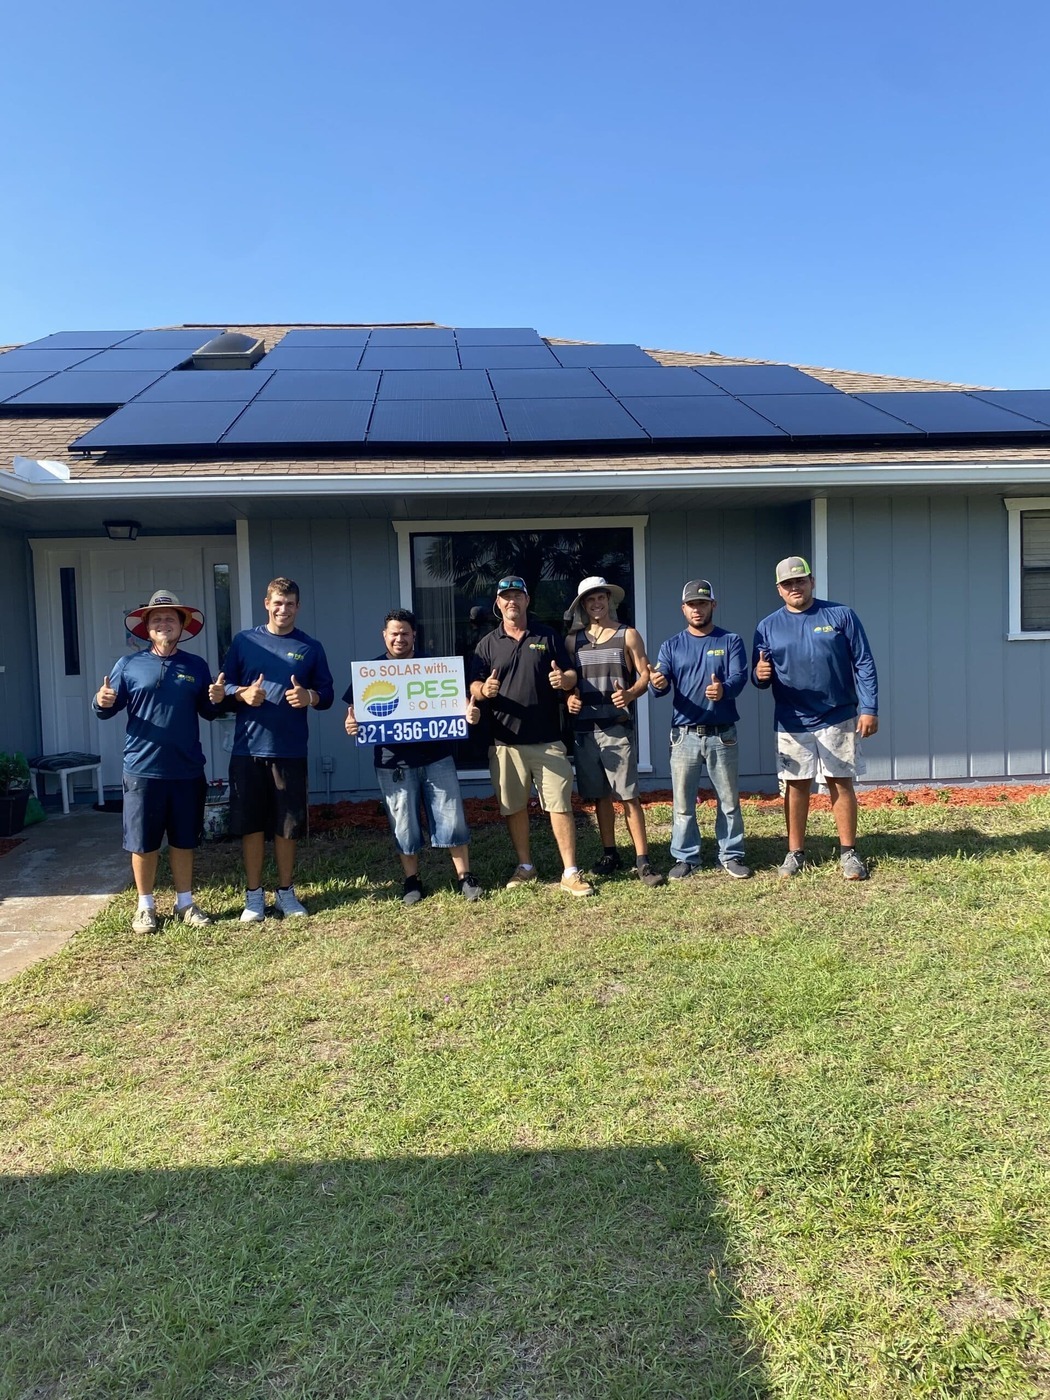 Highly regarded as the solar company for Floridians by Floridians, PES Solar has earned the trust of its clients with its impeccable solutions and solid customer support to become the largest solar panel installer in the state.